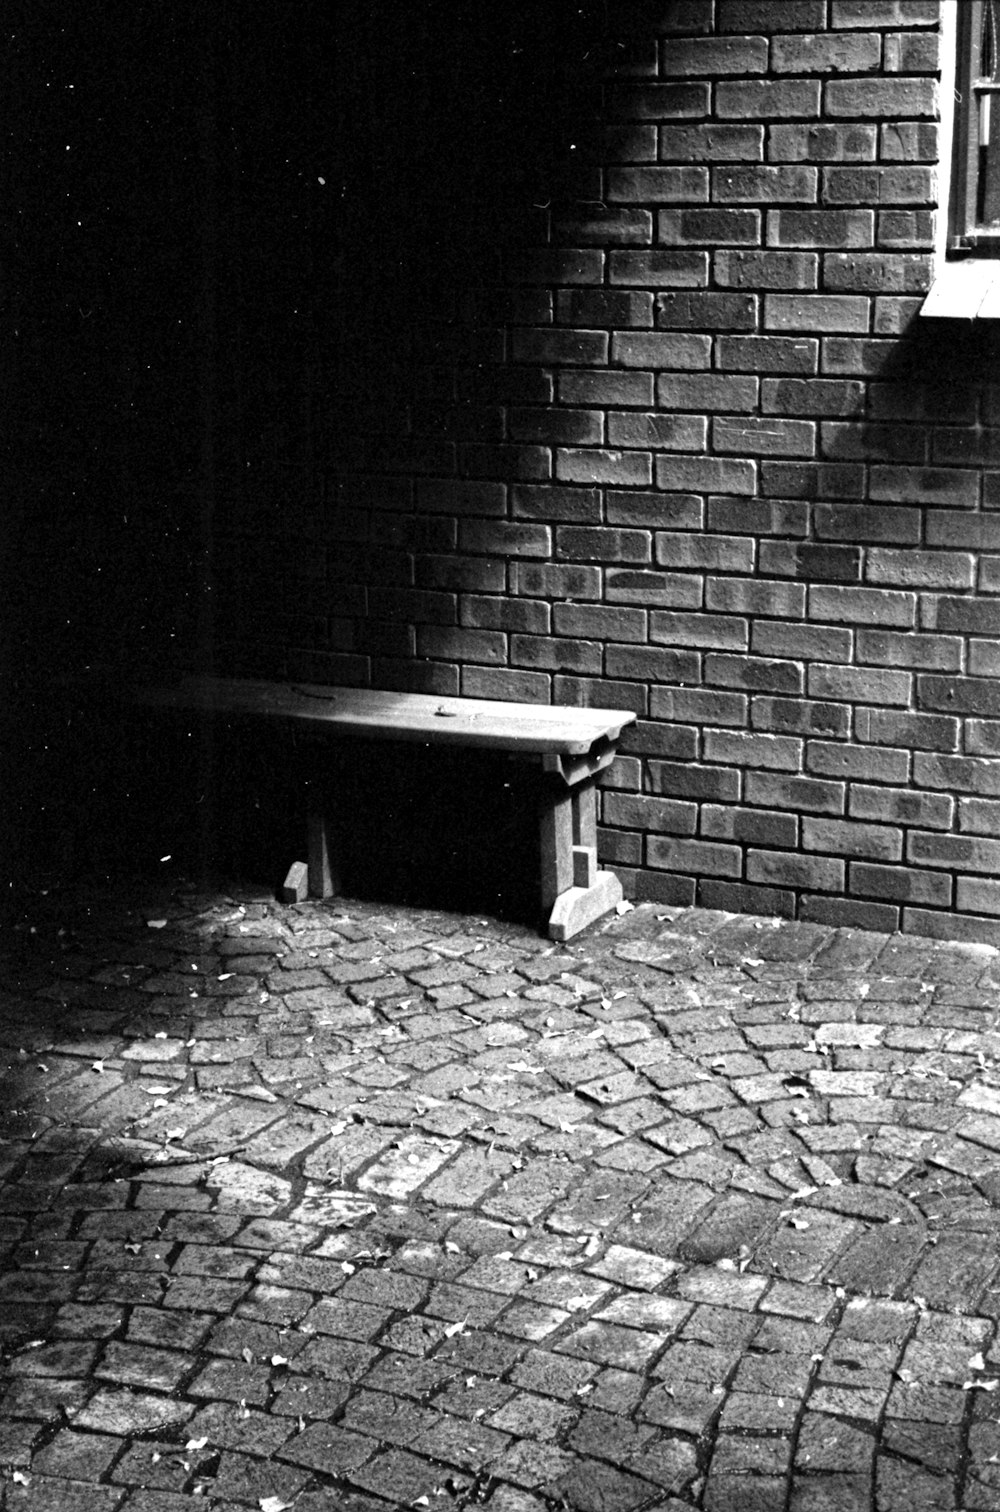 a stone bench sitting next to a brick wall